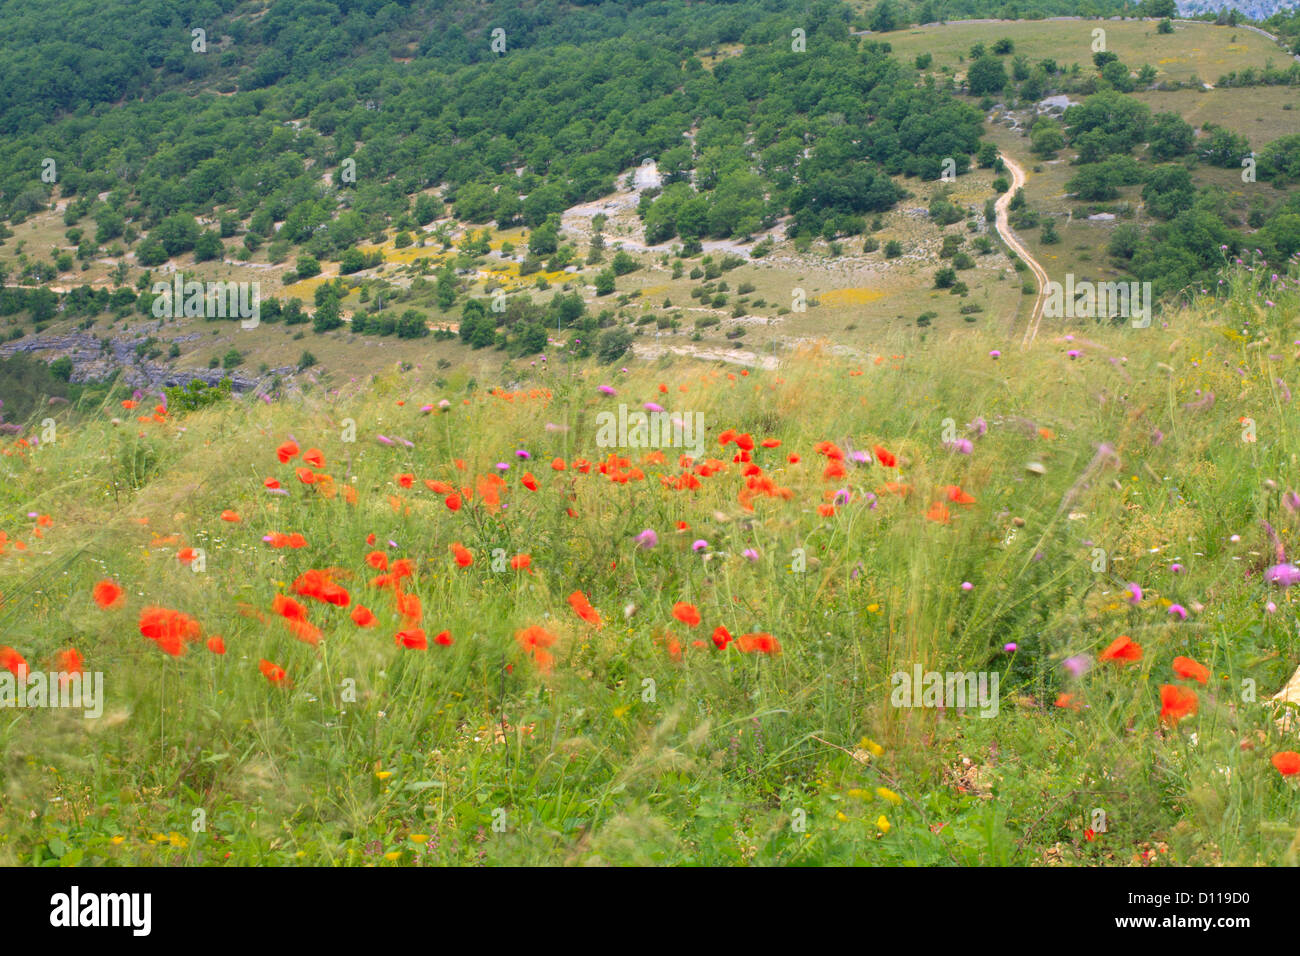 Disturbed ground habitat with flowering Corn Poppies (Papaver rhoeas) and Musk Thistles (Carduus nutans) on a windy day. France. Stock Photo